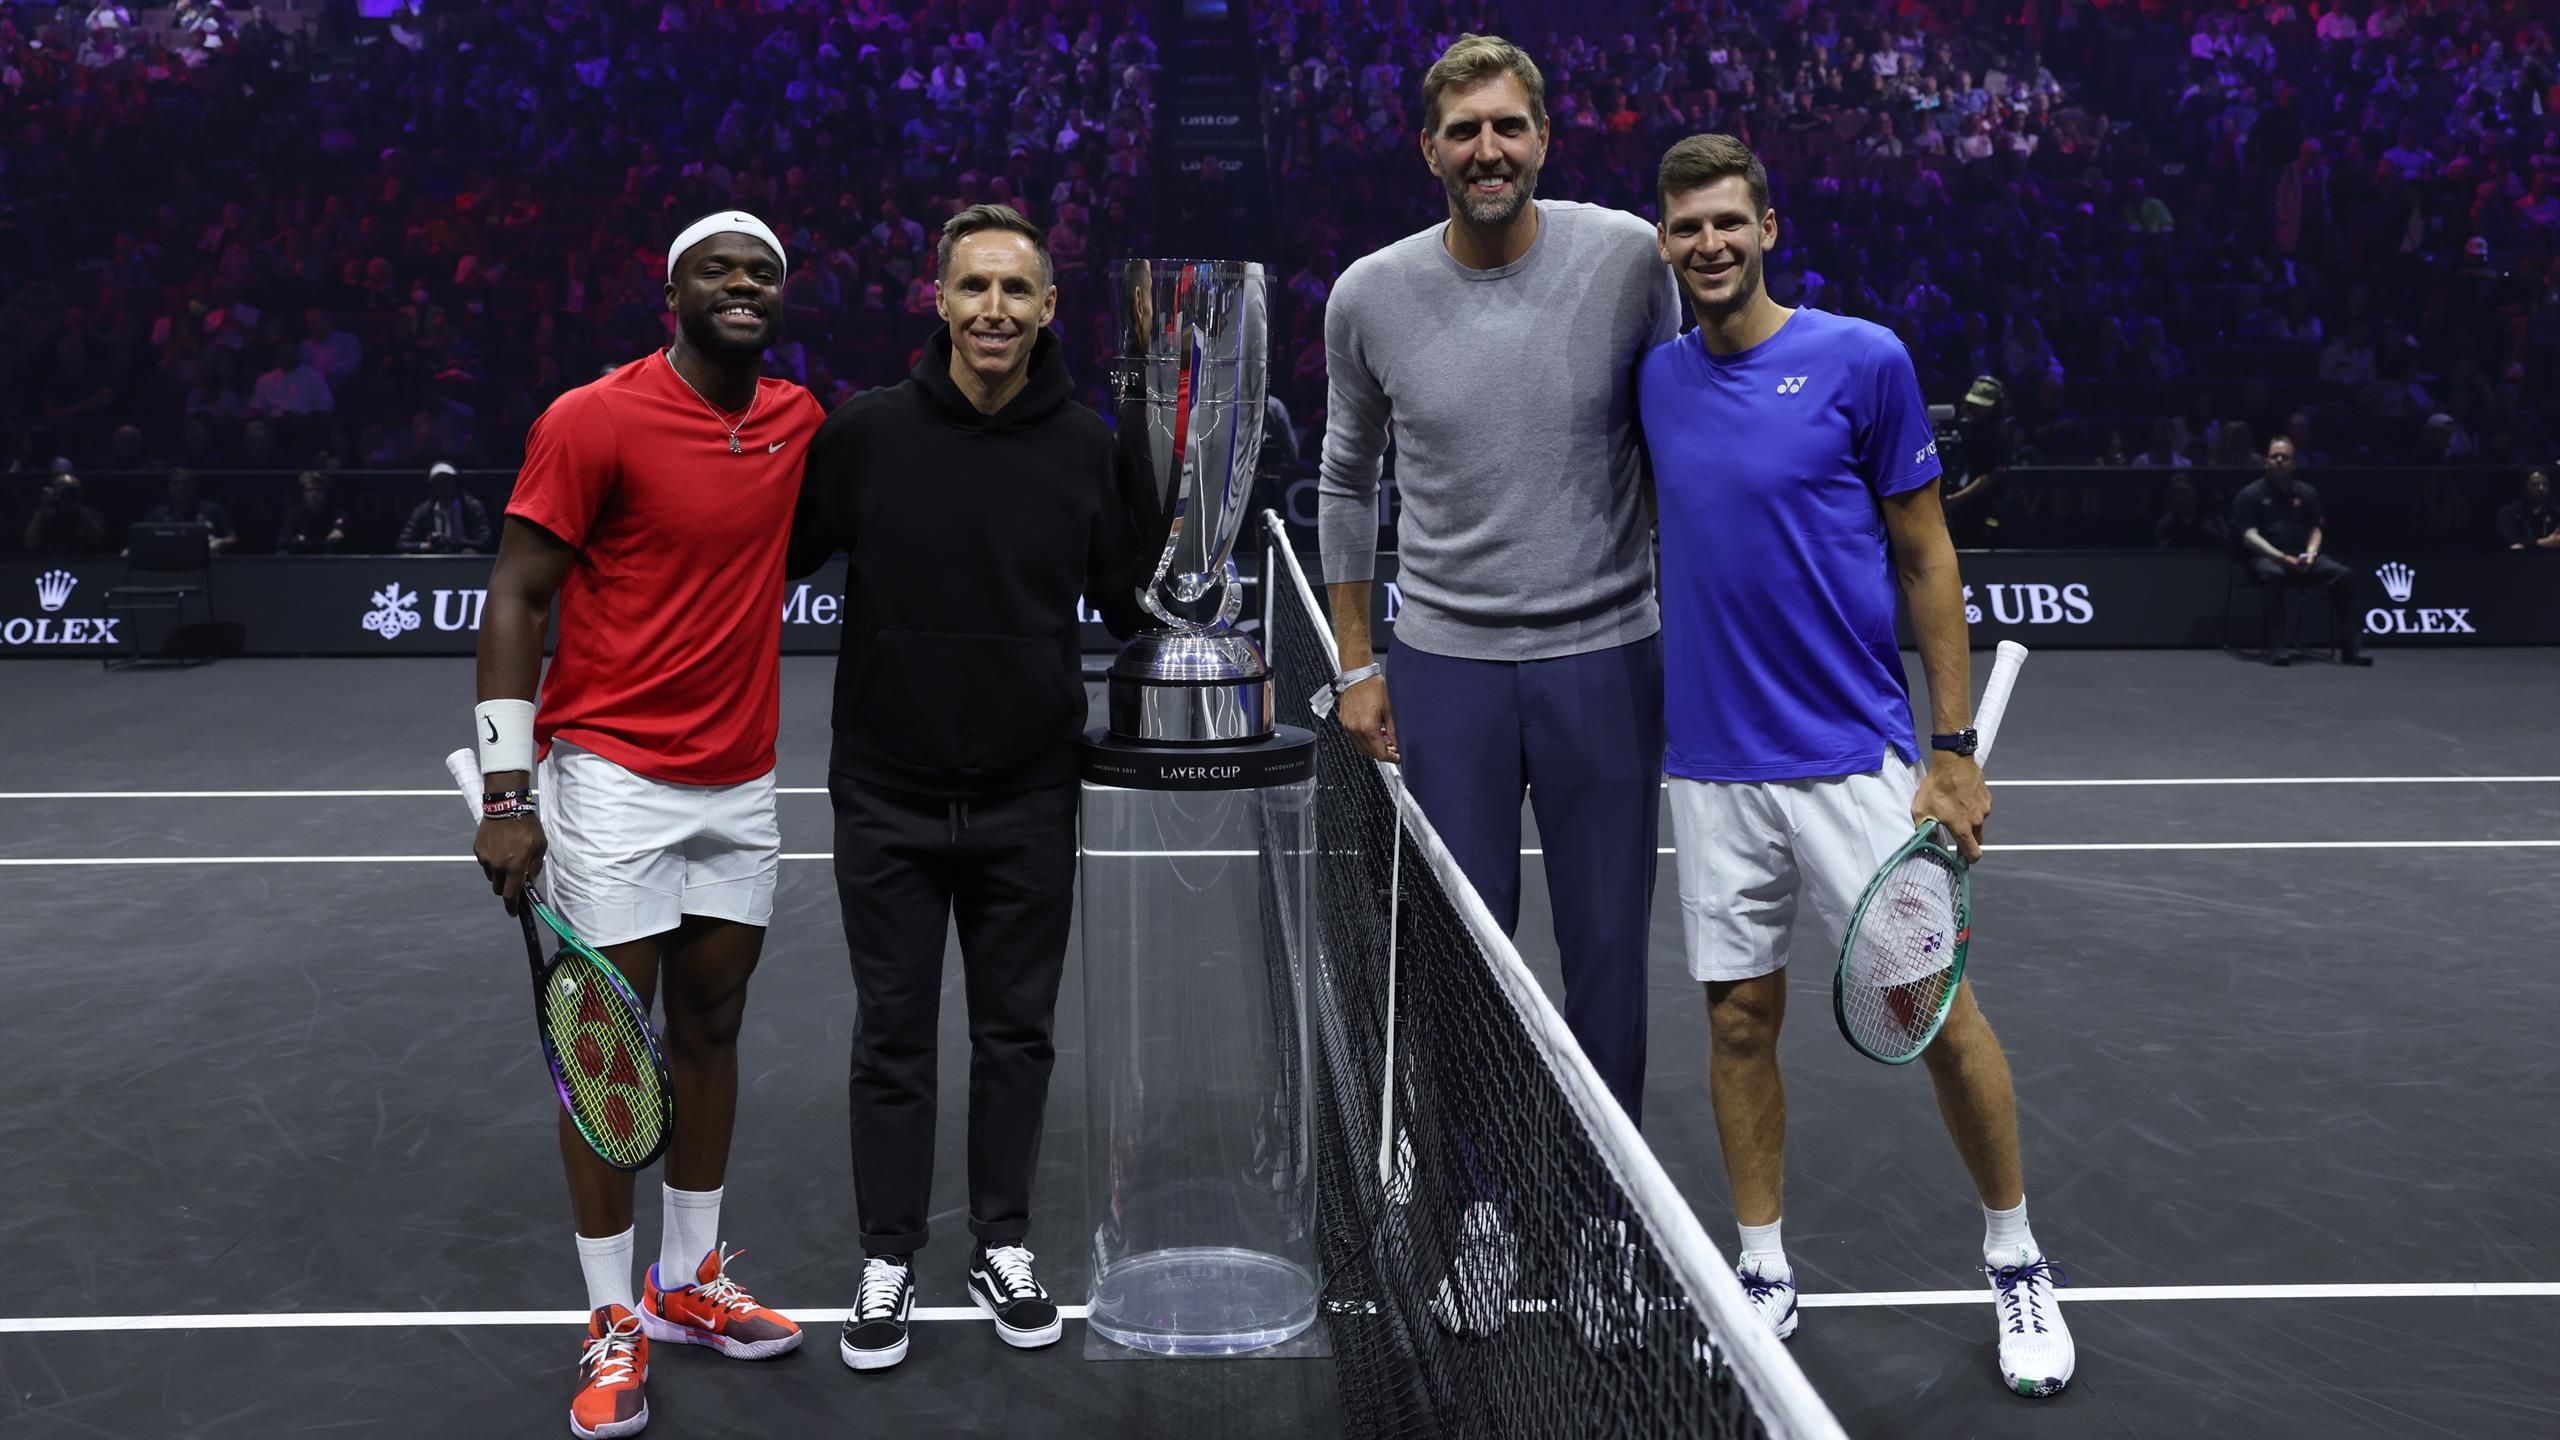 Laver Cup NBA legends Dirk Nowitzki and Steve Nash star in coin toss with Frances Tiafoe and Hubert Hurkacz - Tennis video